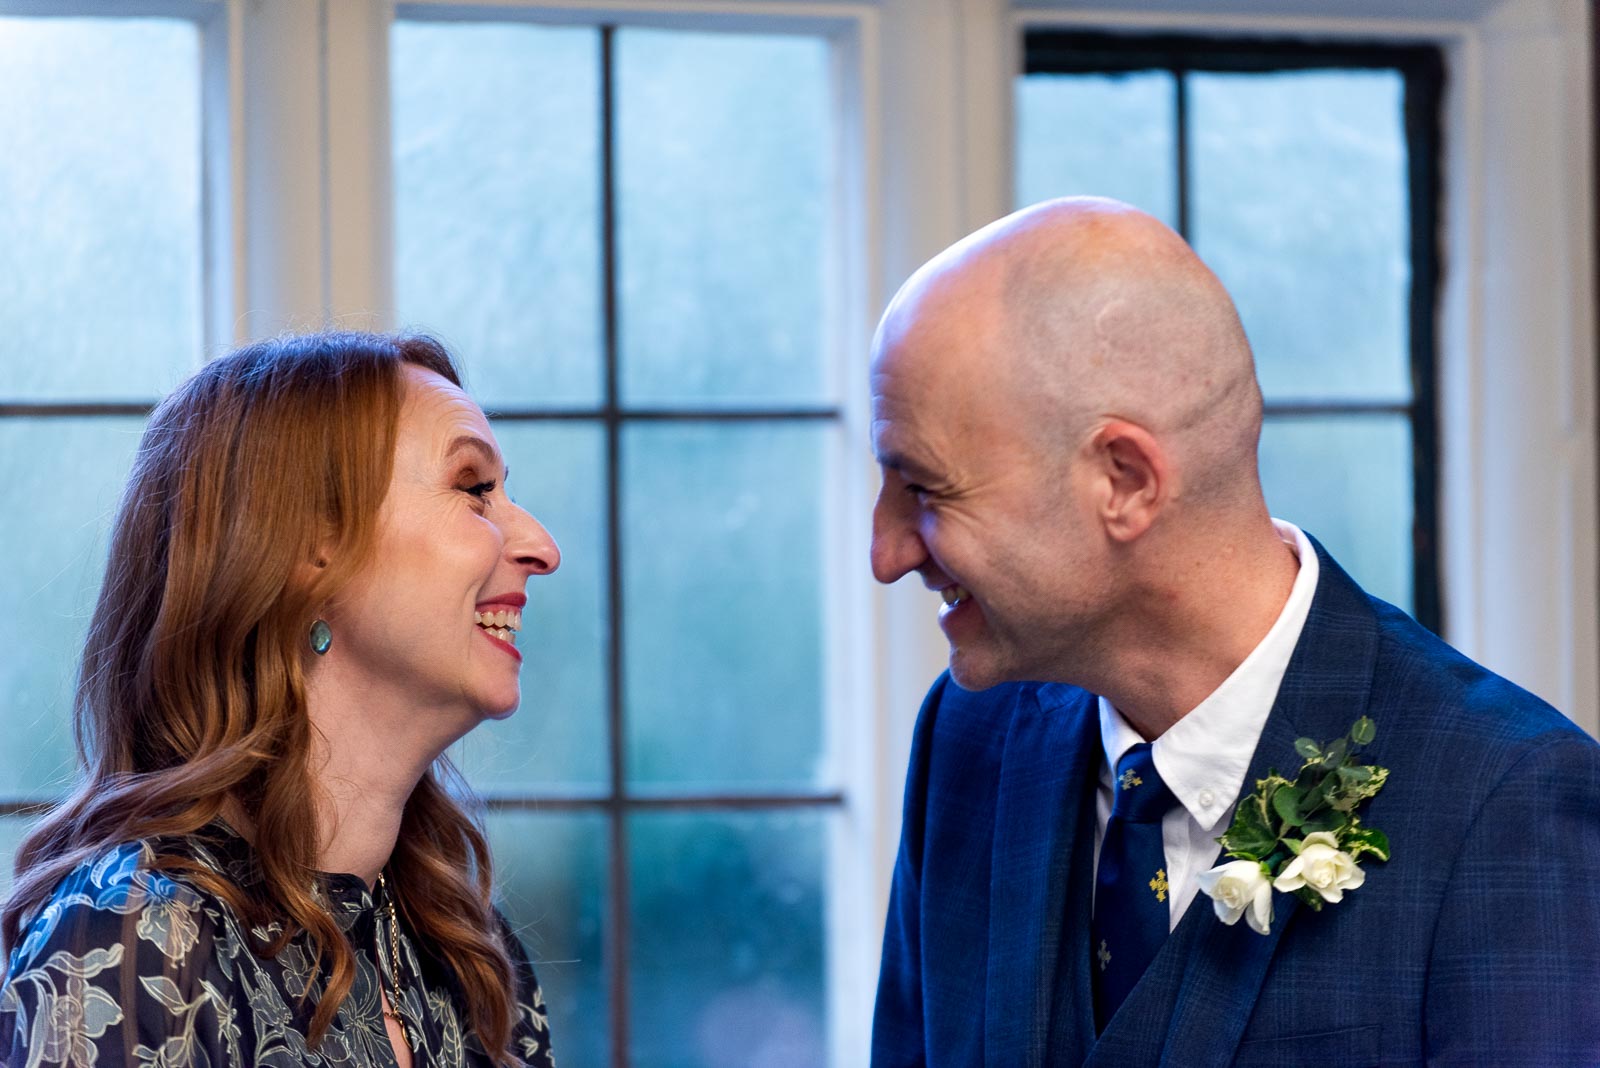 Melanie and Ryan enjoy a funny moment at their ceremony in the Evelyn Room at Lewes Register Office.